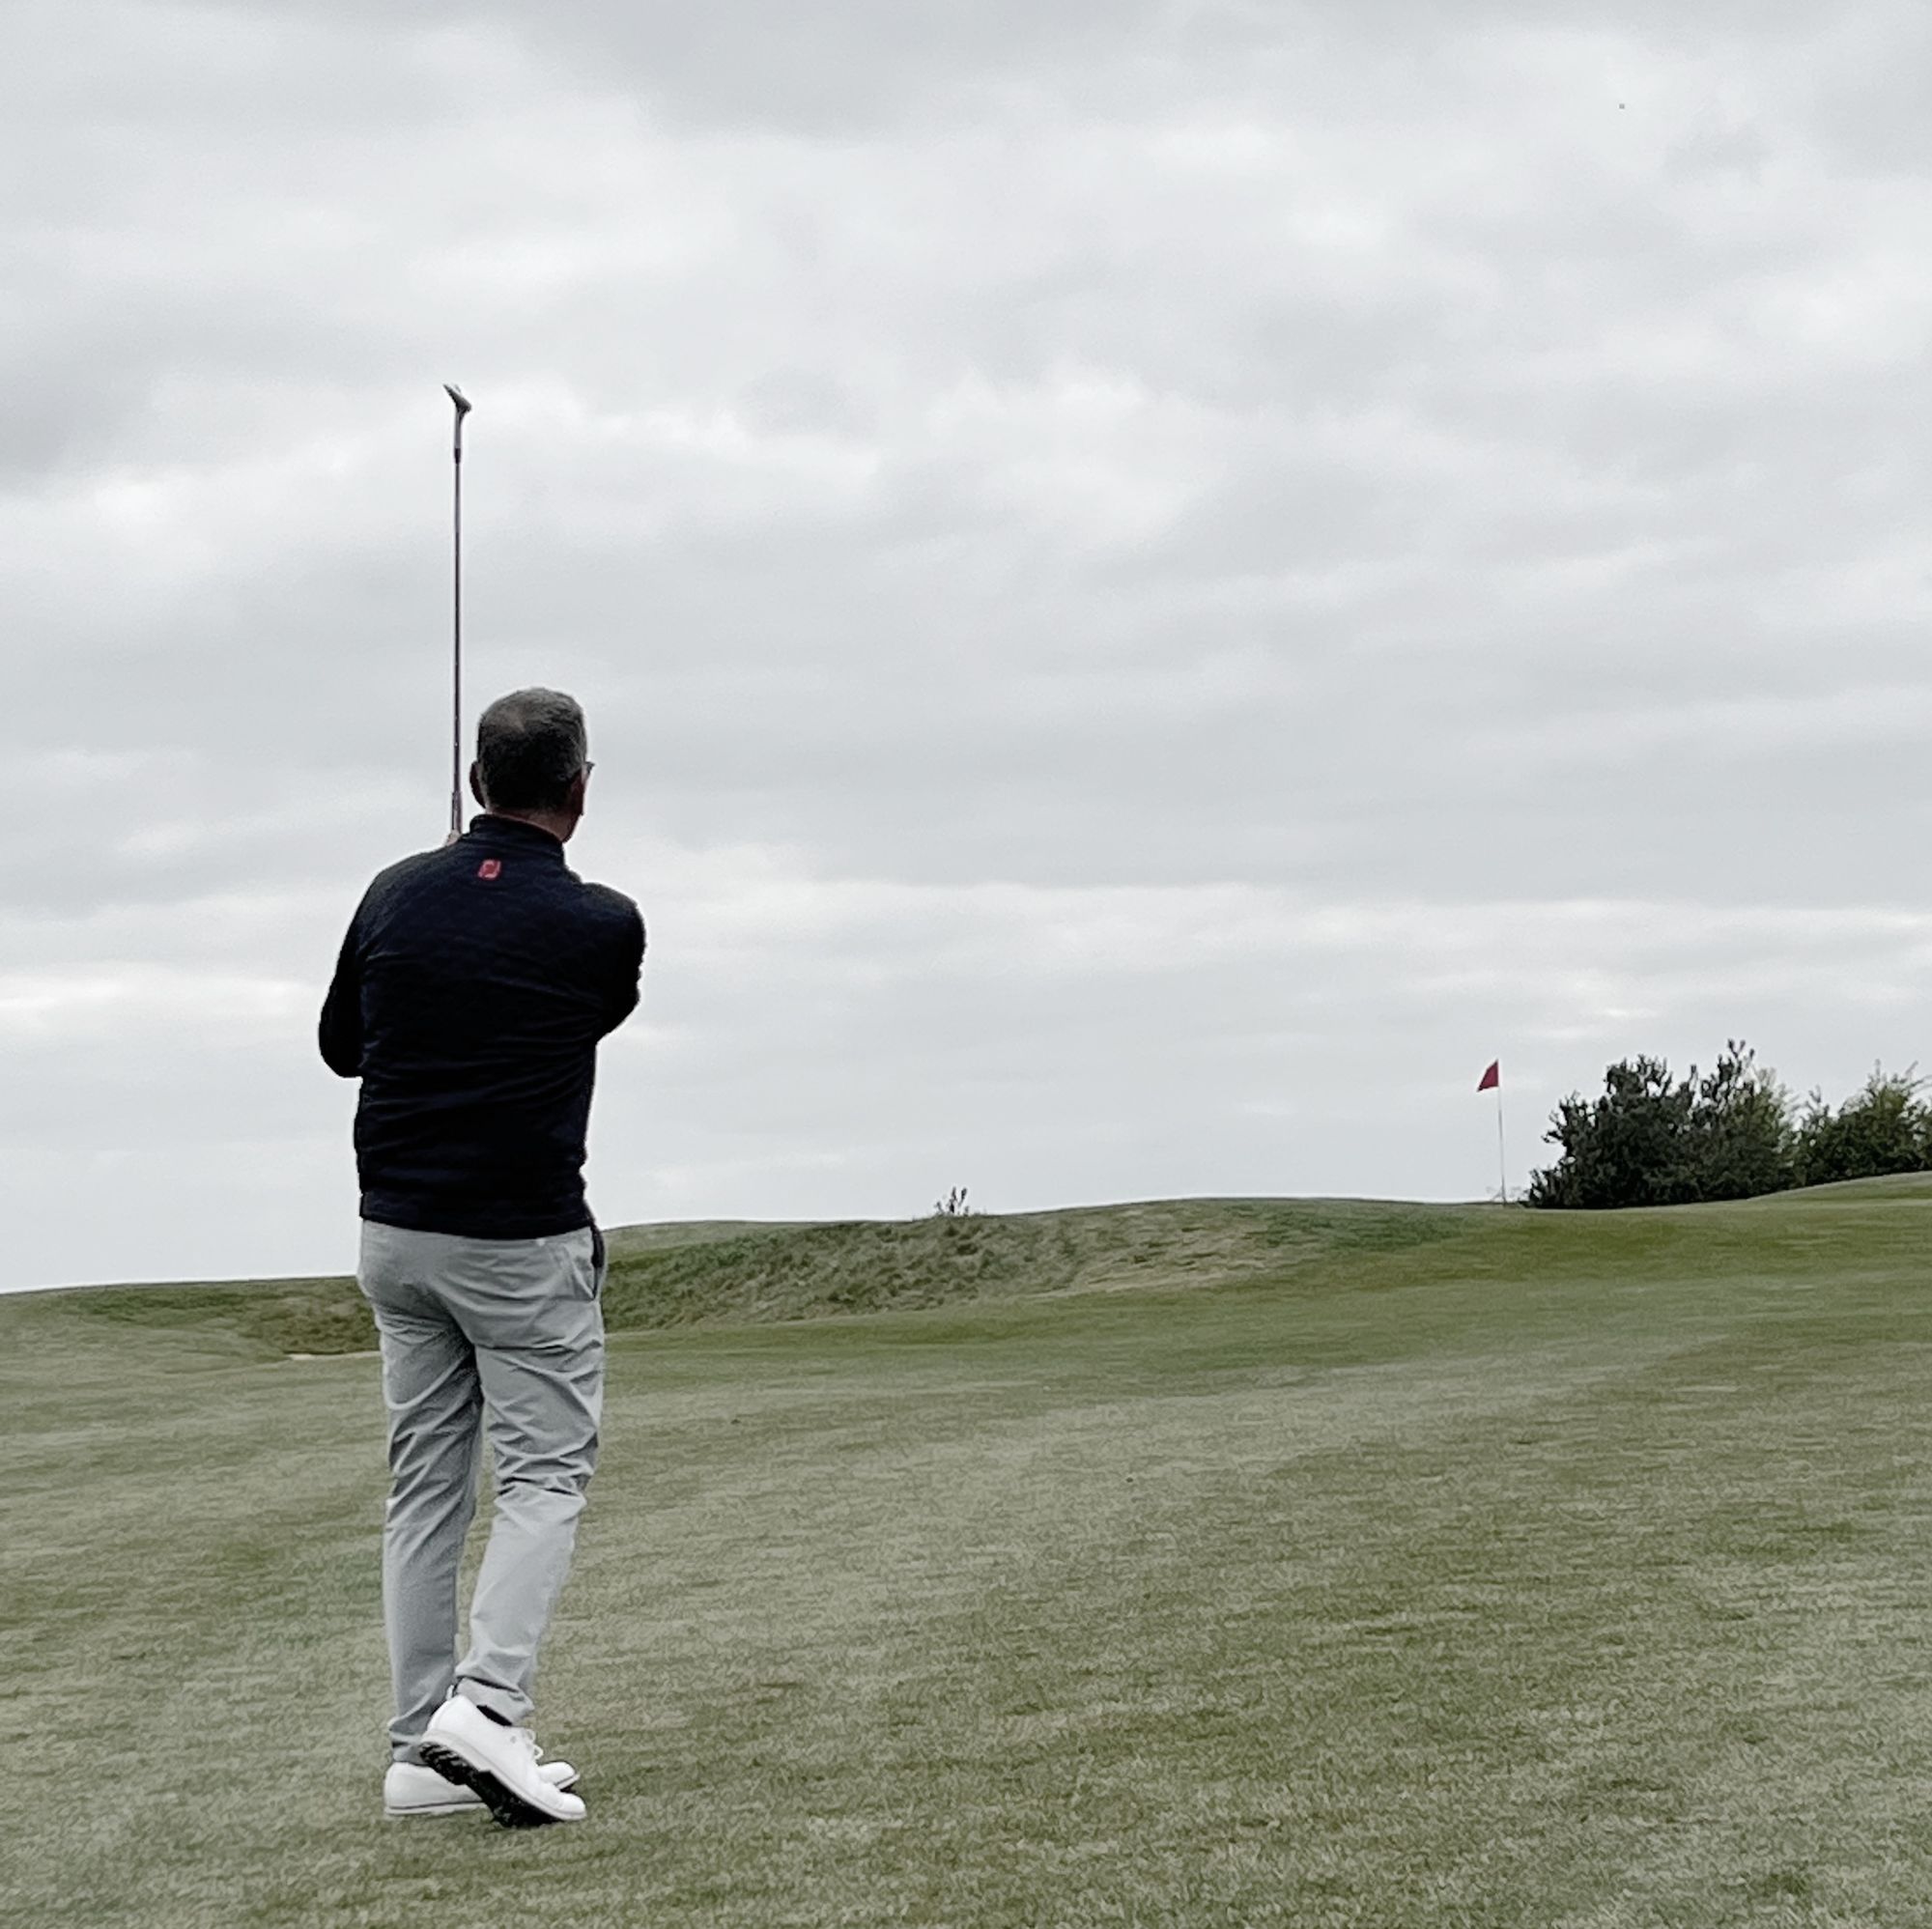 10 Inspirational Quotes to Improve Your Golf (& Your Life)